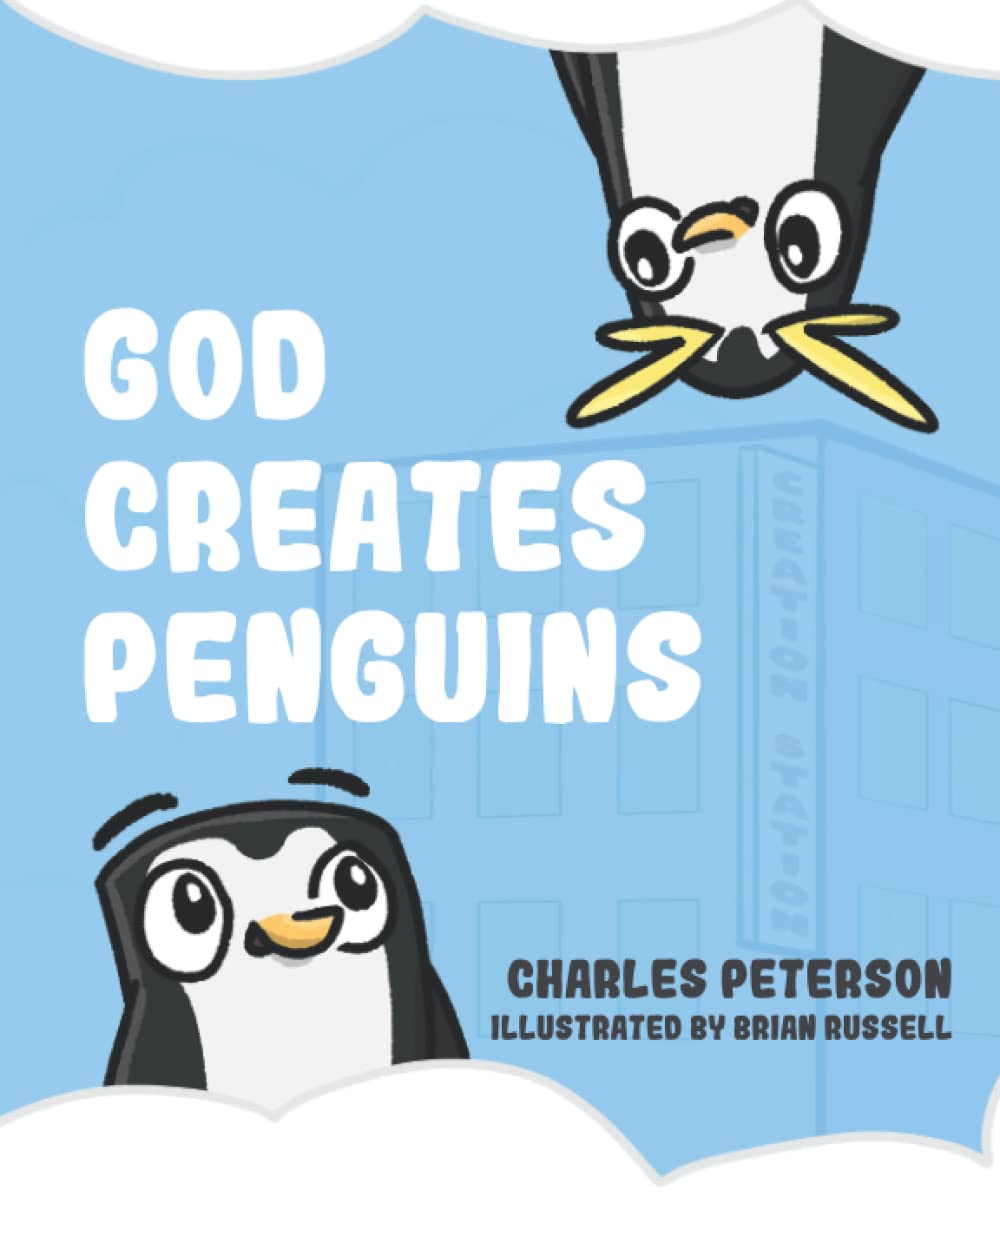 God Creates Penguins by Charles Peterson